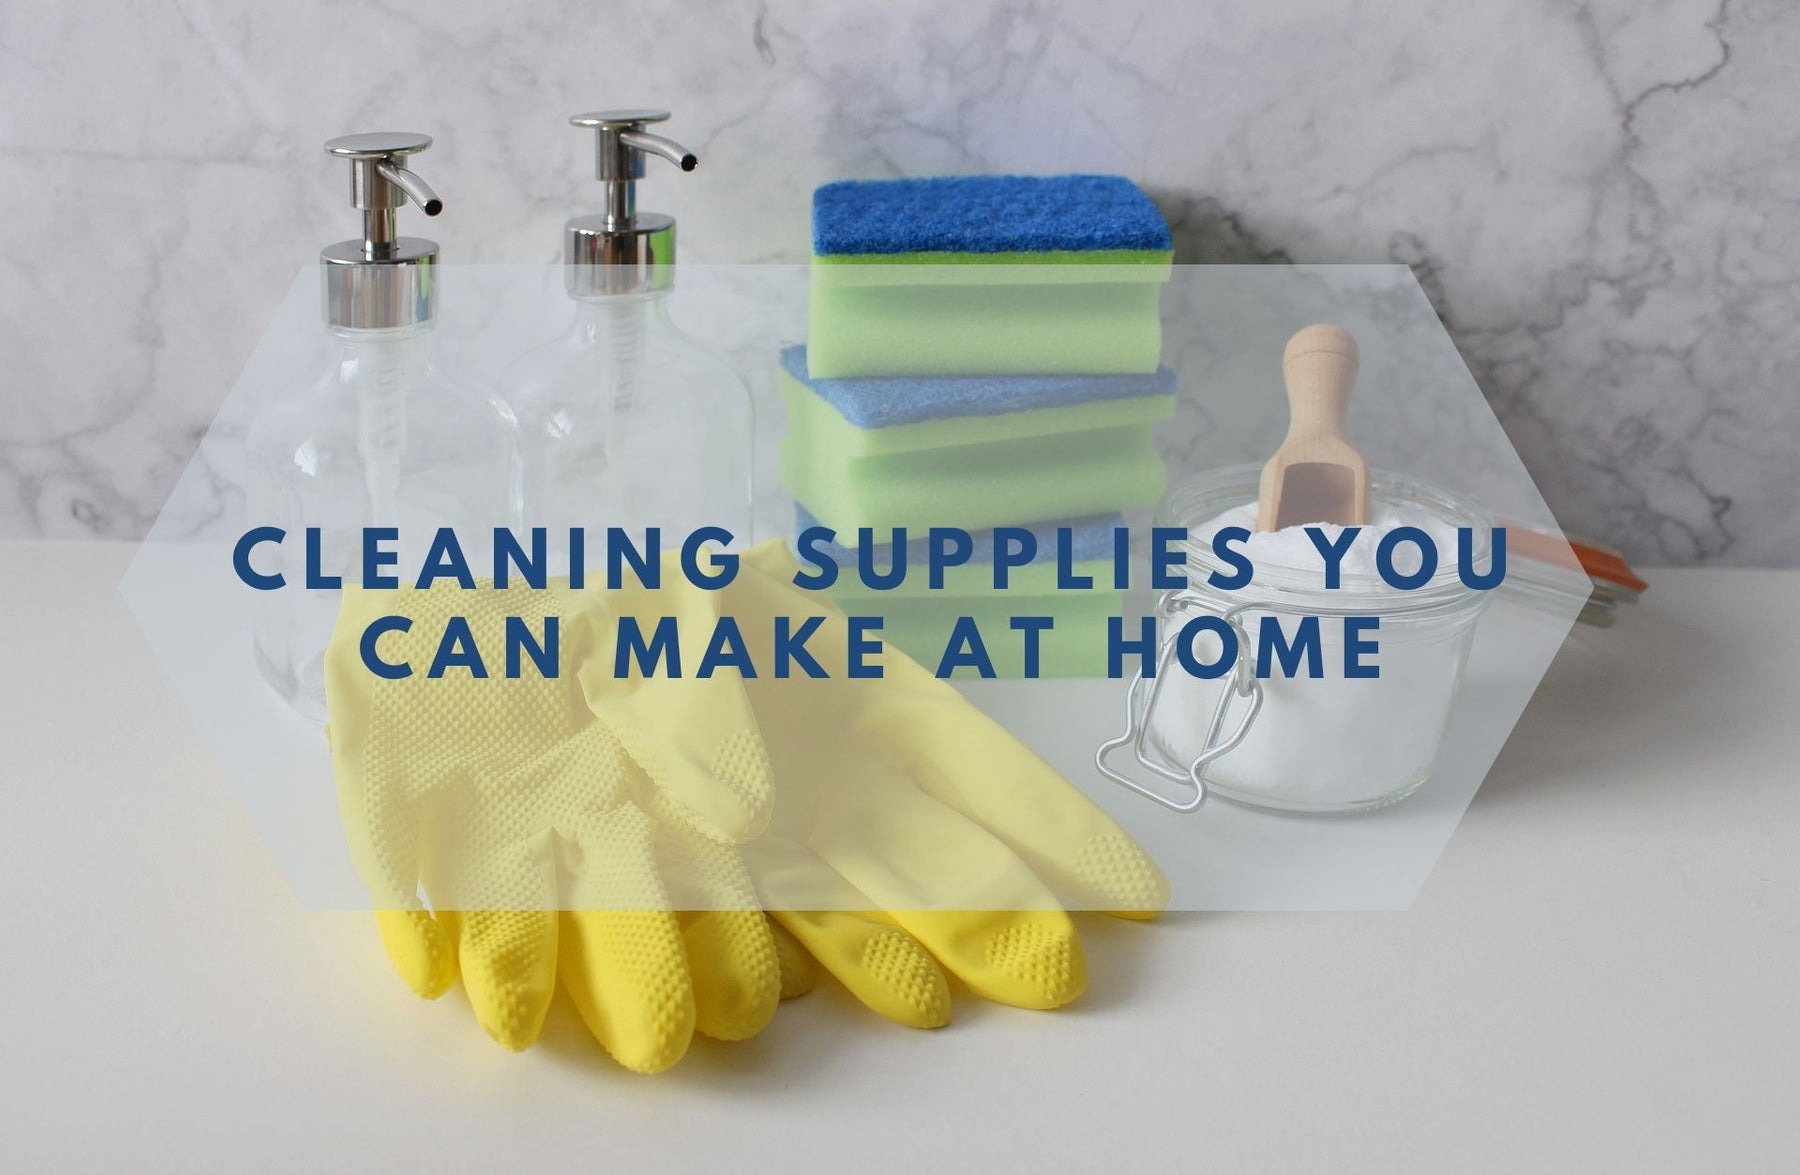 Cleaning - Cleaning Supplies You Can Make at Home